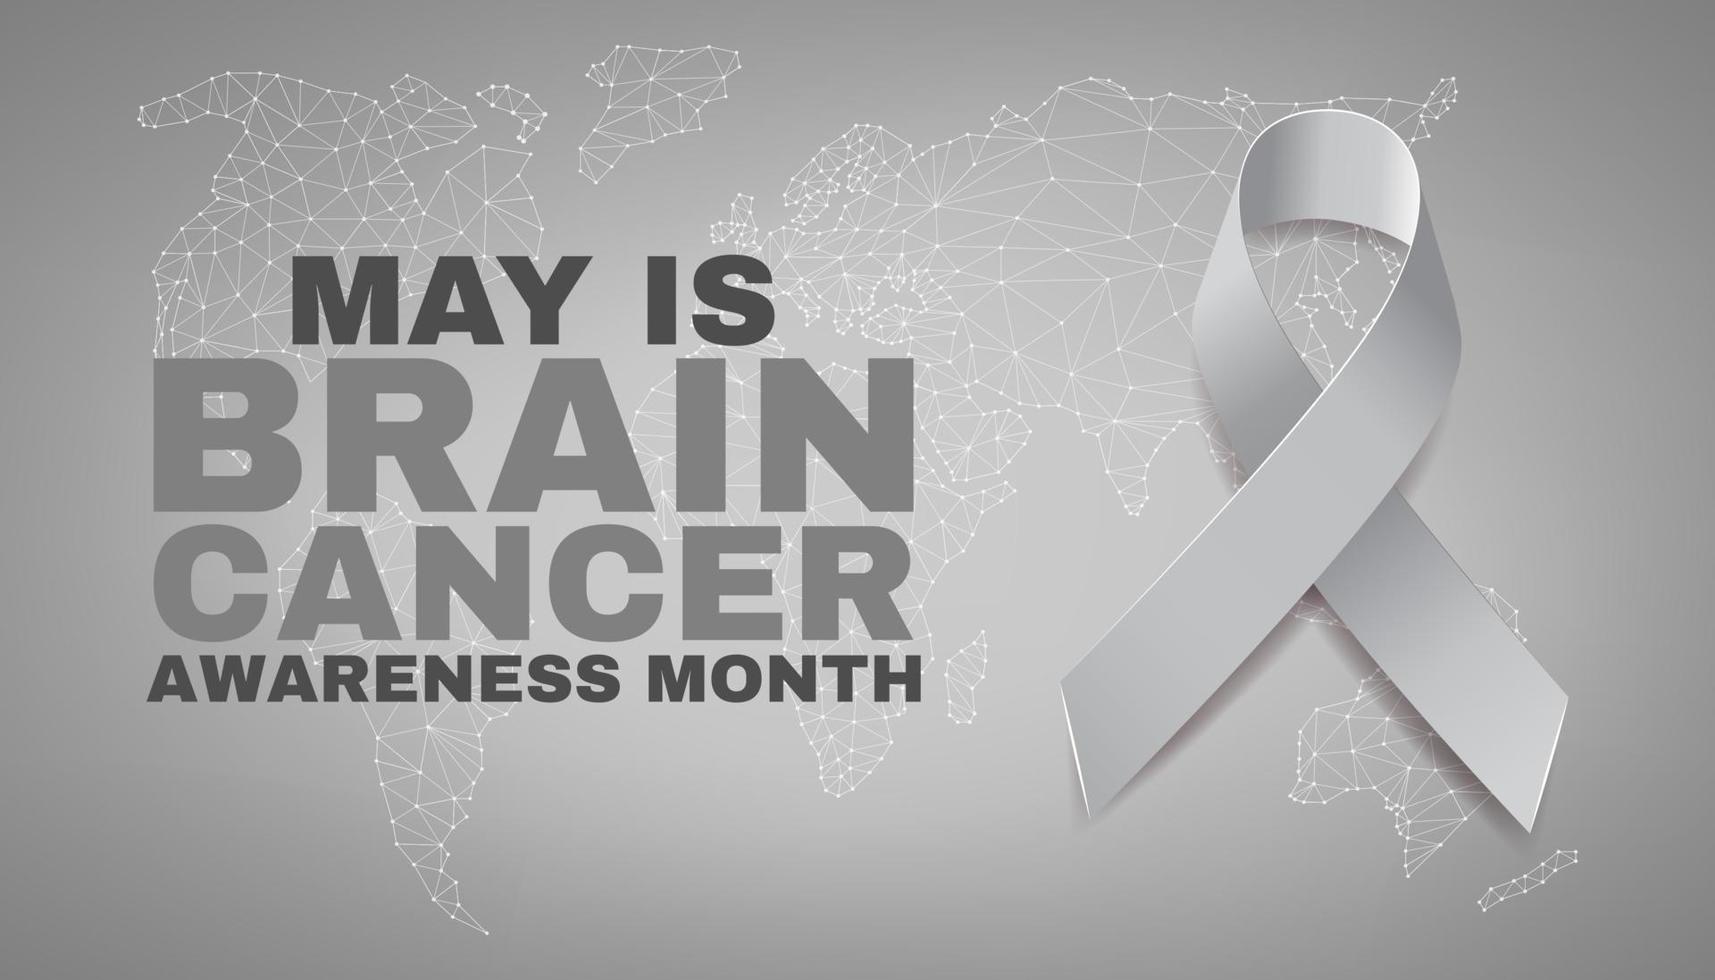 Brain cancer awareness month concept. Banner with text and grey ribbon.  Vector illustration.